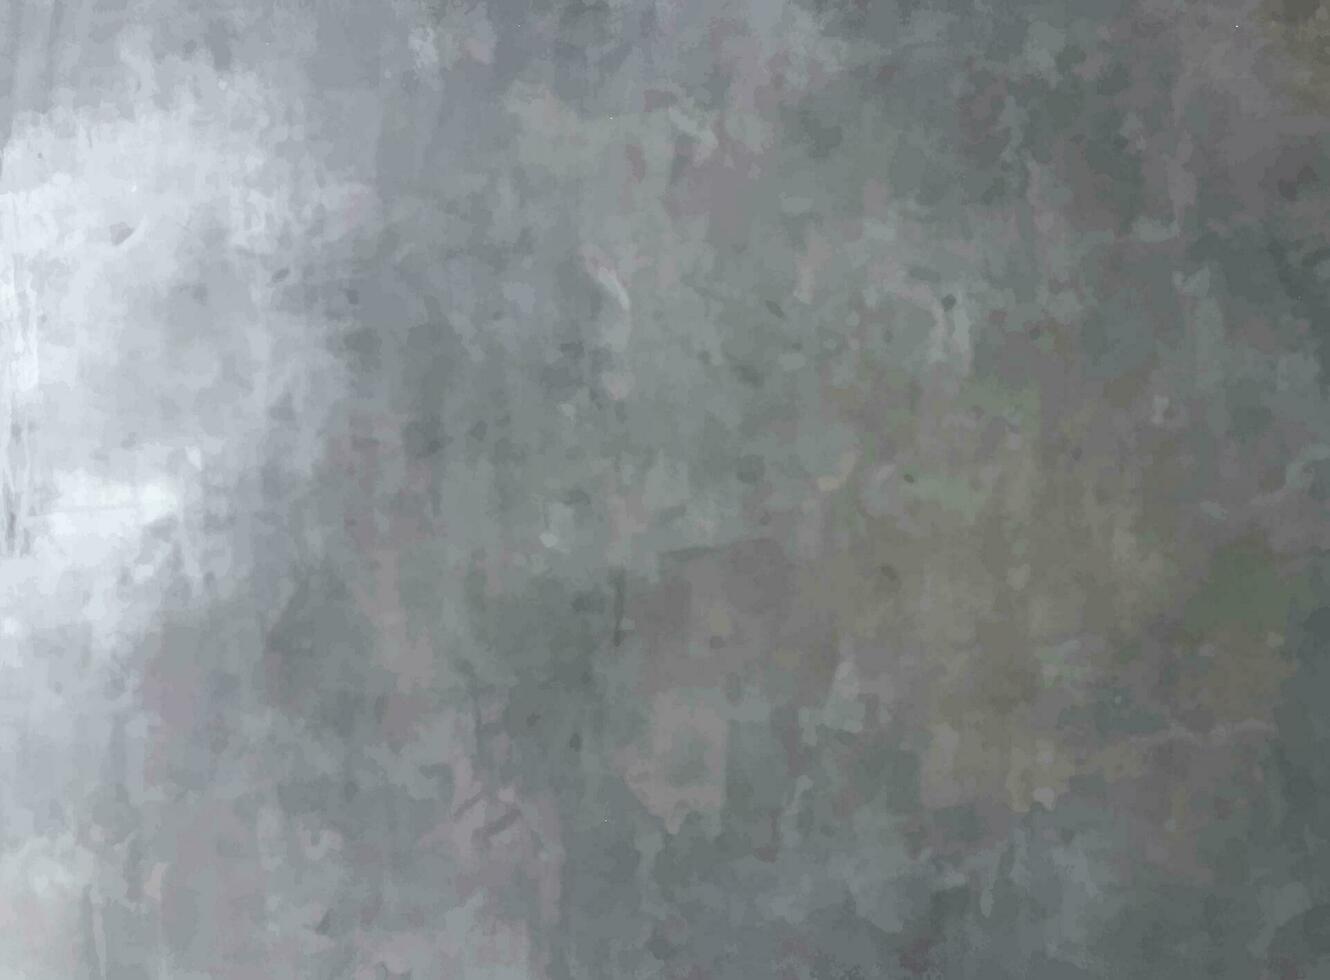 Monochrome texture with white and gray color. Grunge old wall texture, concrete cement background. Artistic cotton grunge gray background. vector